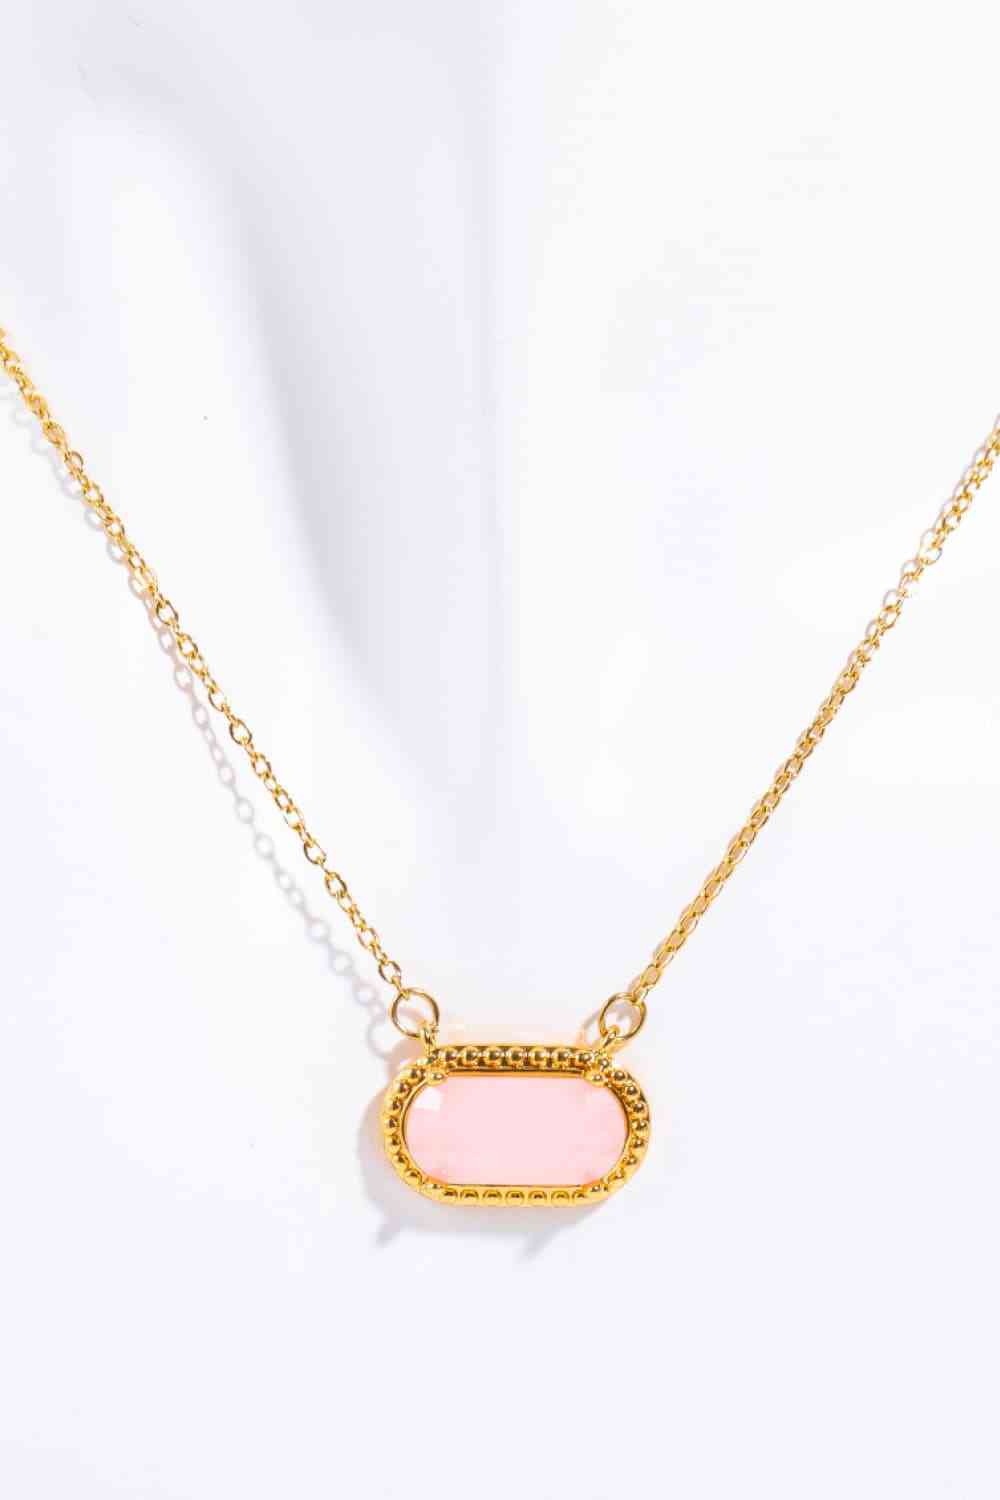 Copper 14K Gold-Plated Pendant Necklace